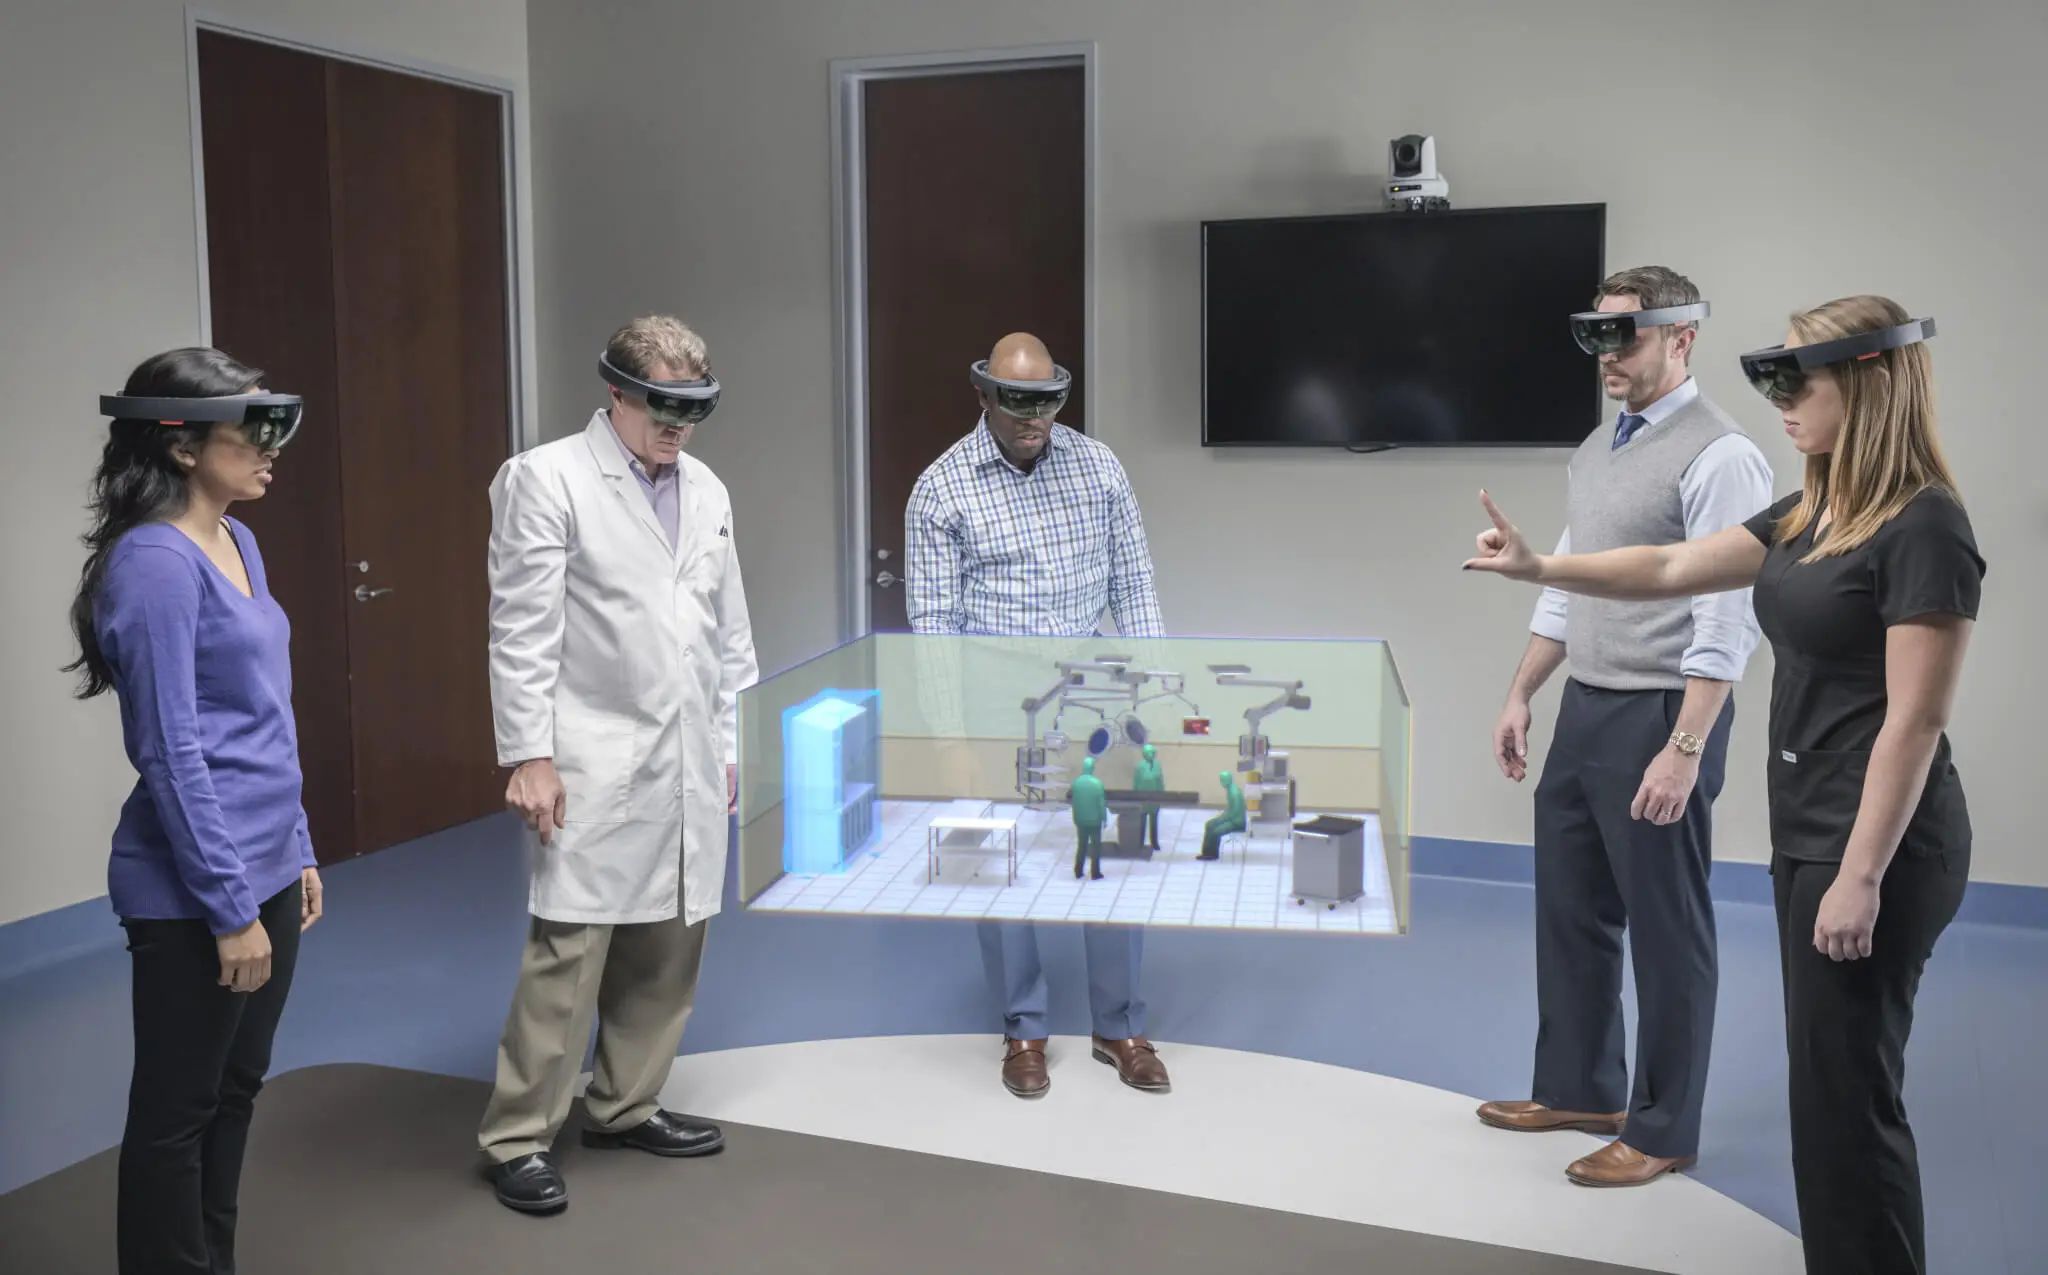 How To Make UI For HoloLens From Scratch